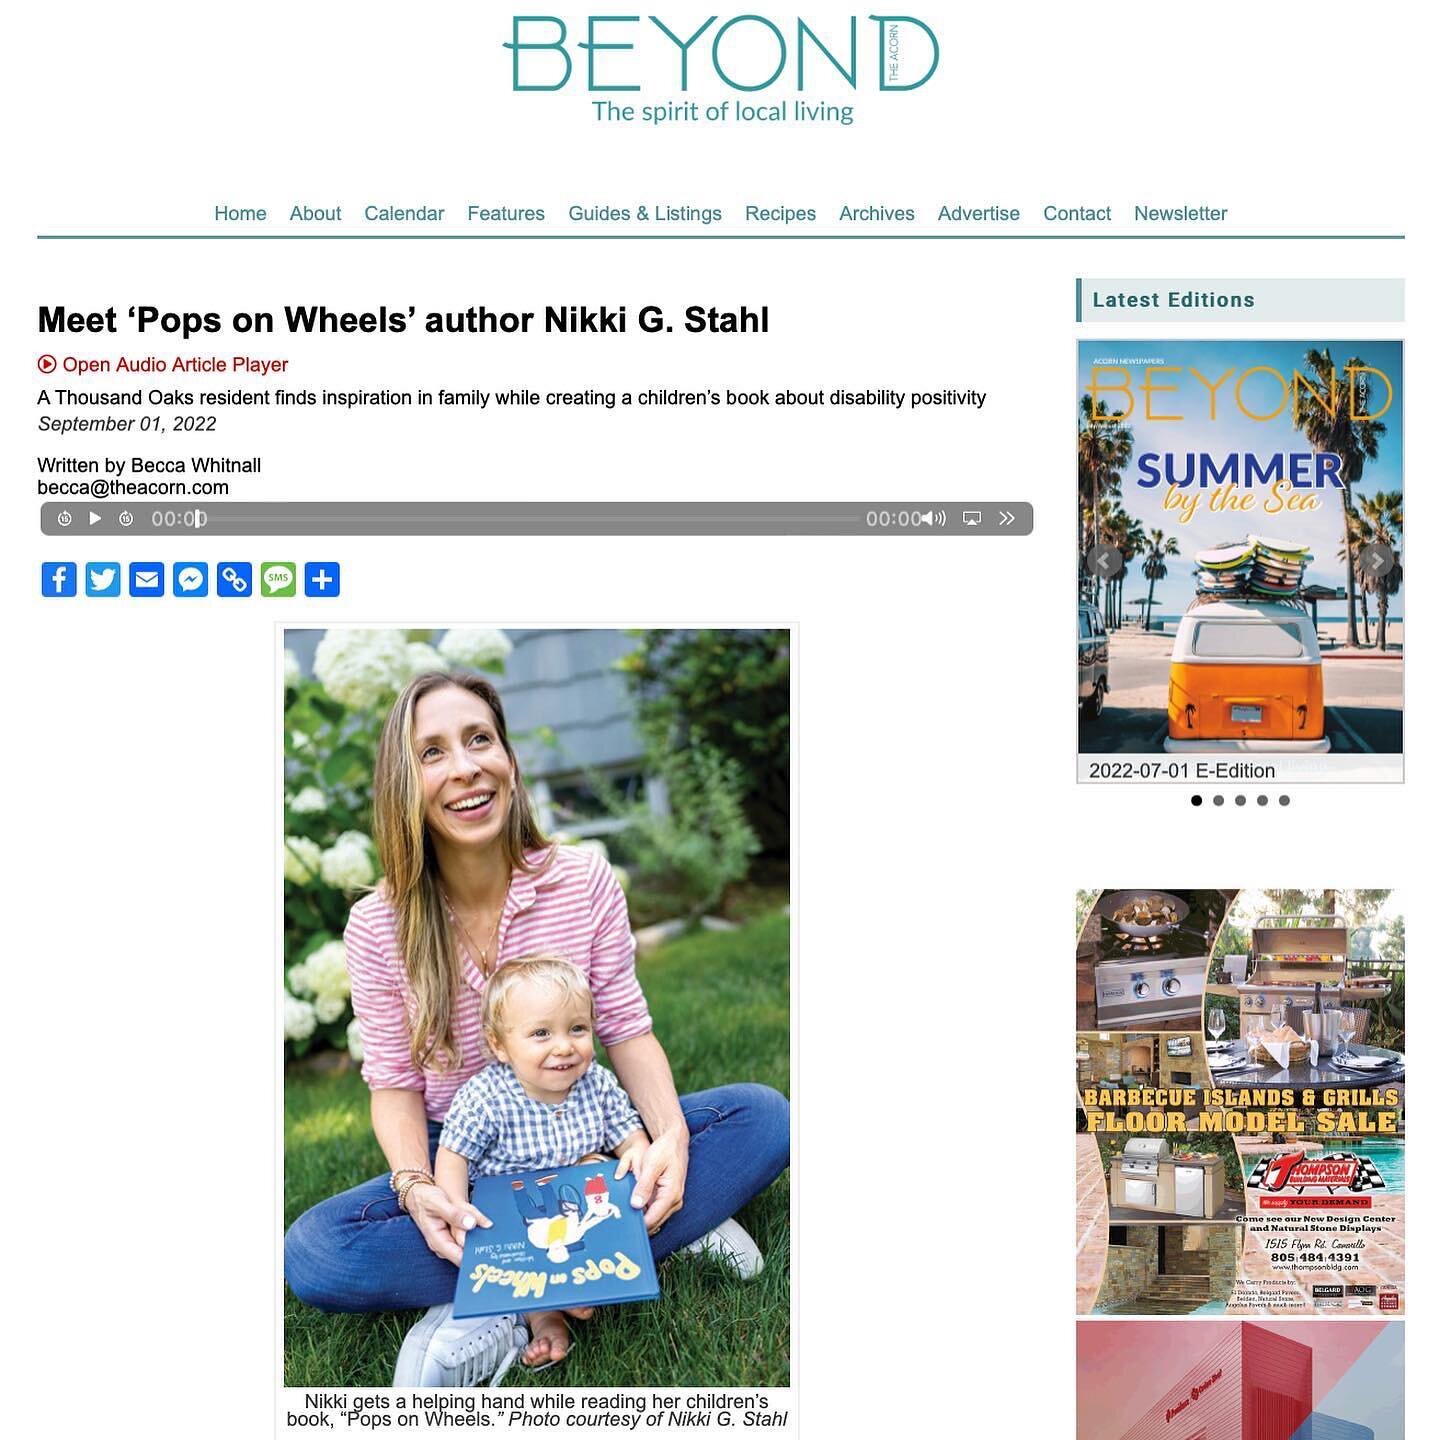 Thank you for featuring @popsonwheels in this month&rsquo;s @beyondtheacornmag! Here&rsquo;s a peek, read the full article at beyondtheacorn.net 💛💙💛💙💛